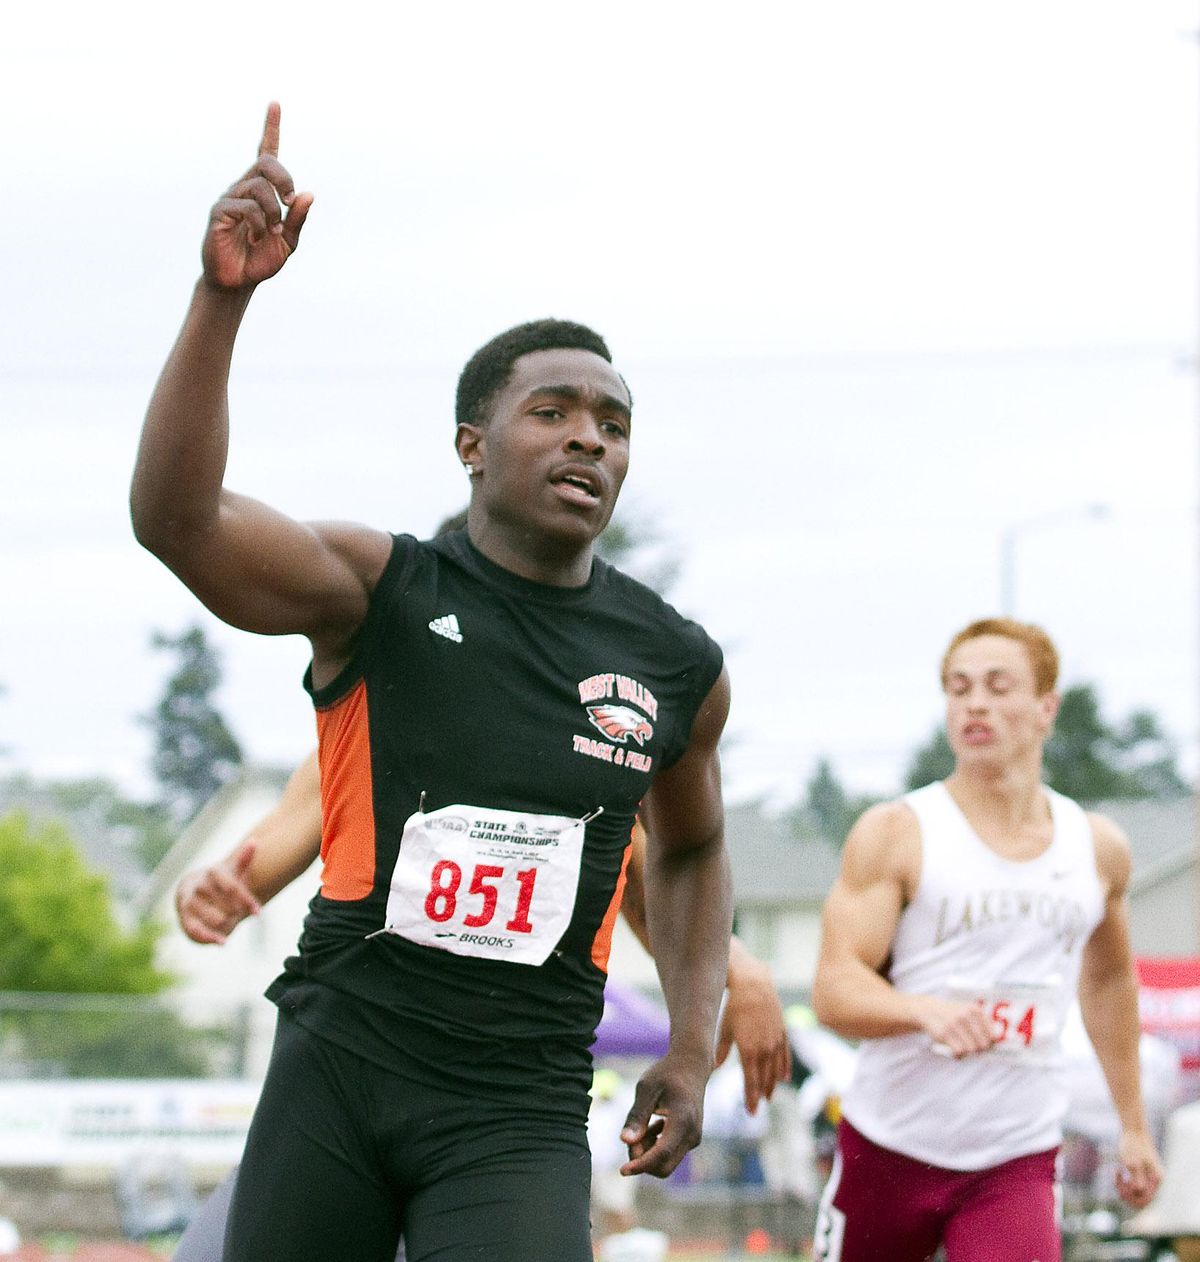 West Valley’s Zechariah Herford reacts to winning the State 2A 100-meter dash on Saturday, May 28, 2016, in Tacoma. (Patrick Hagerty / Special to The Spokesman-Review)